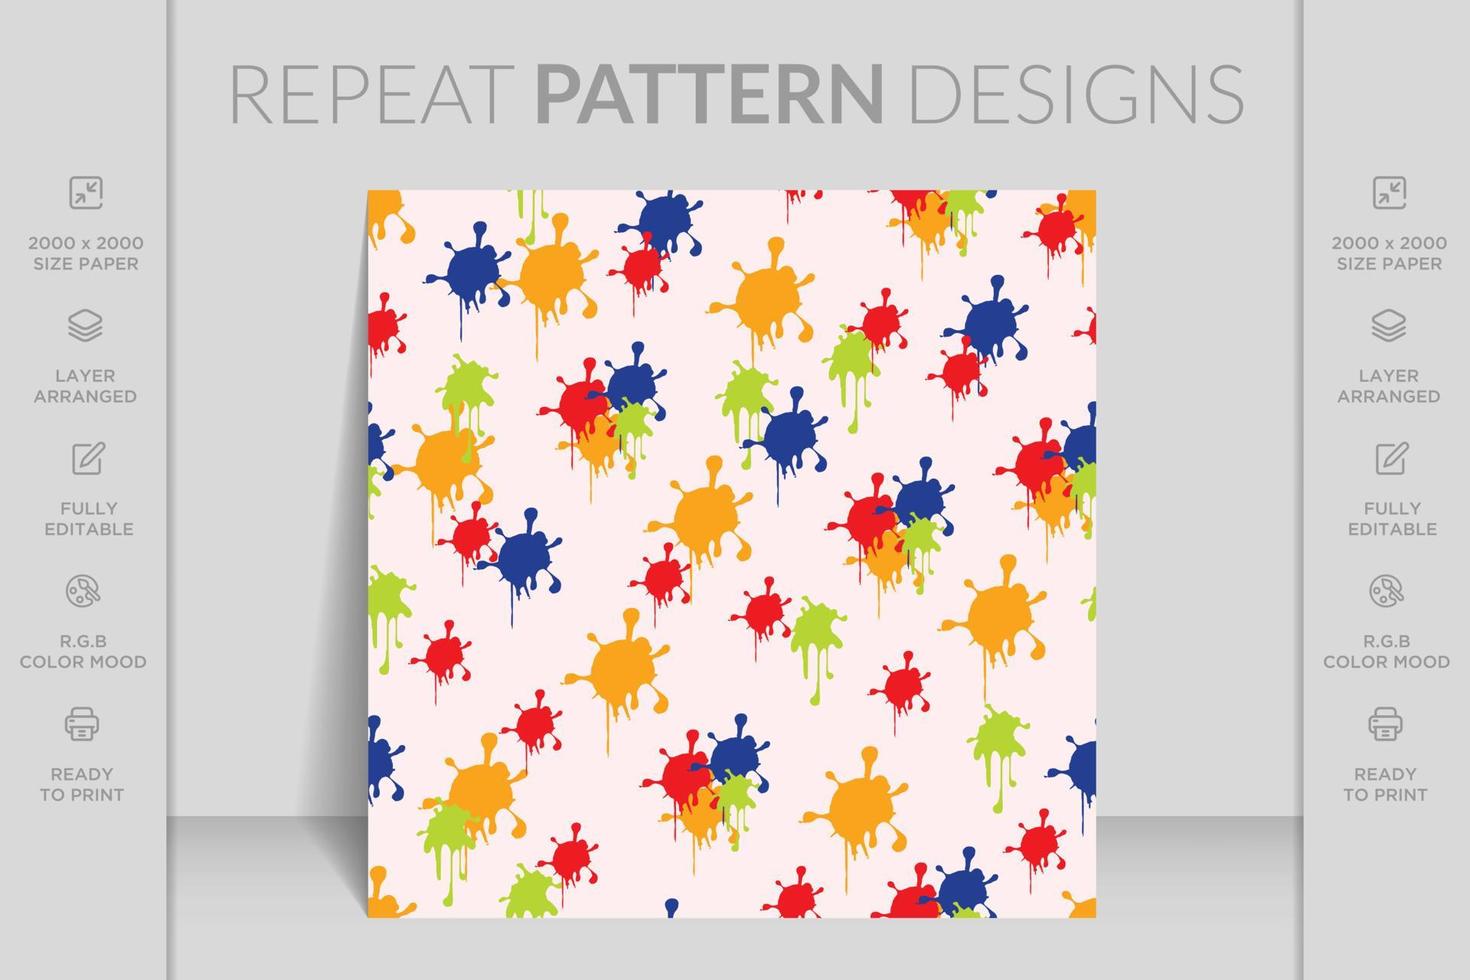 Abstract repeat patterns with colorful background vector